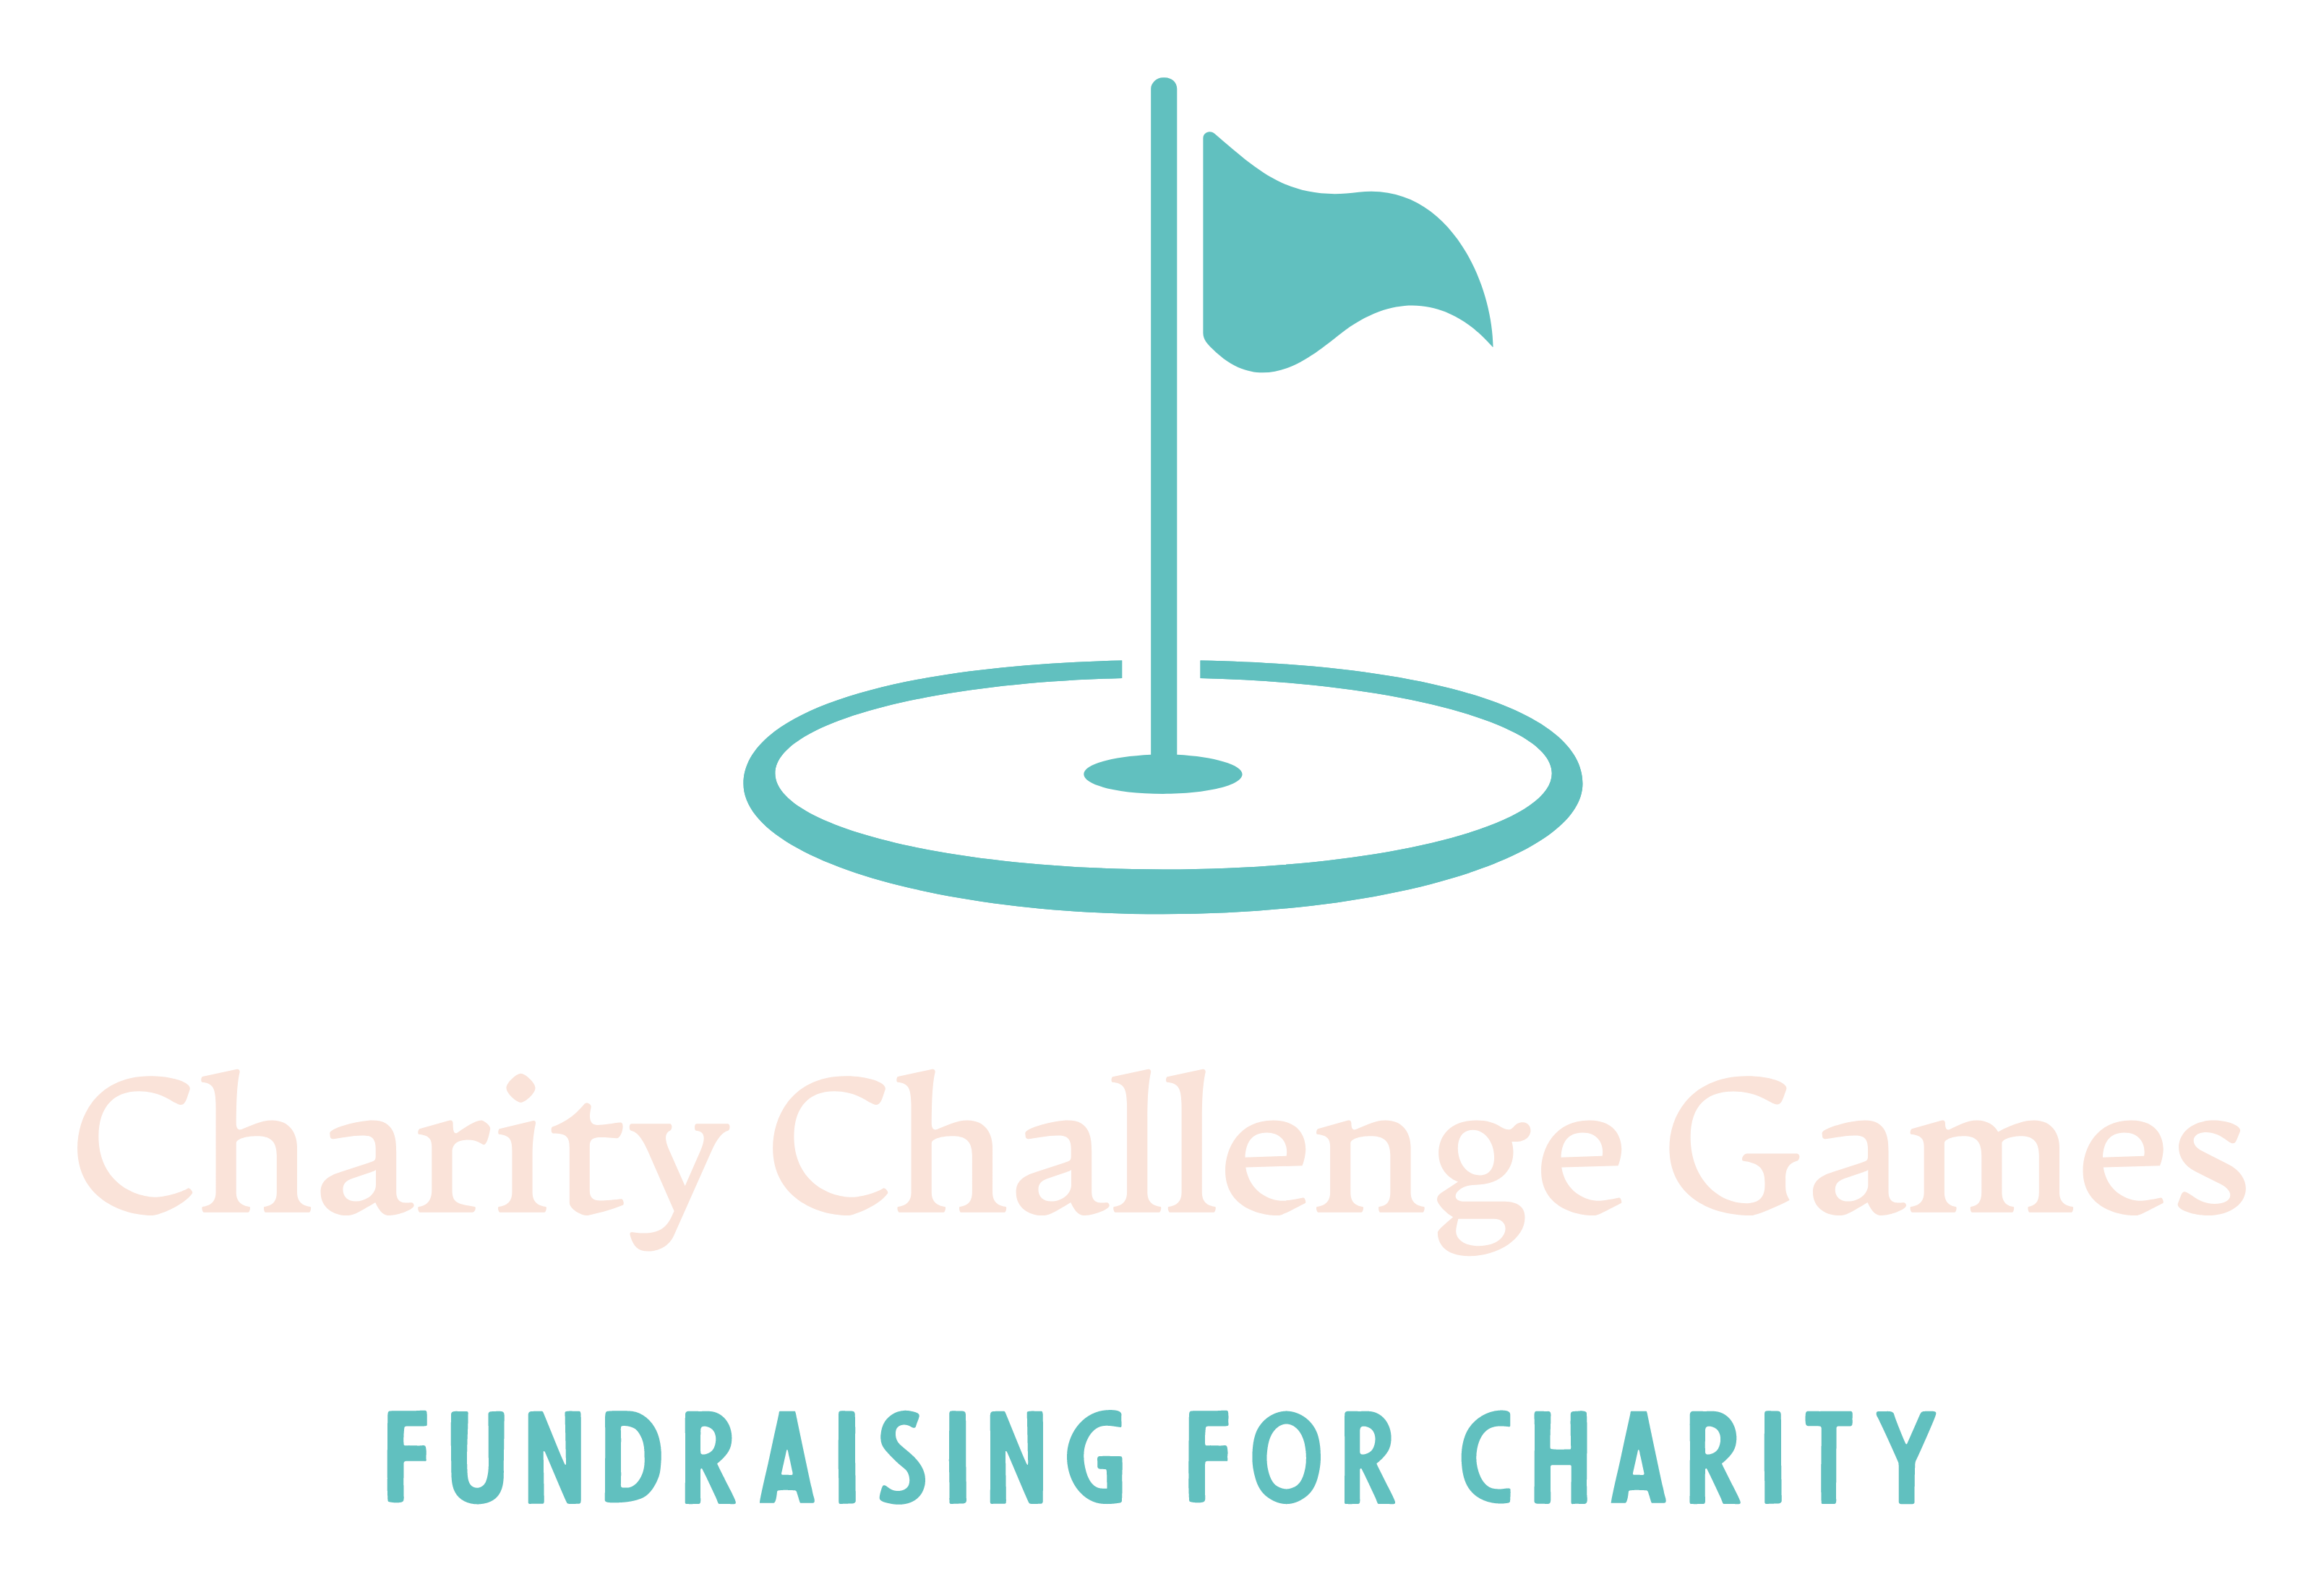 Charity Challenge Games